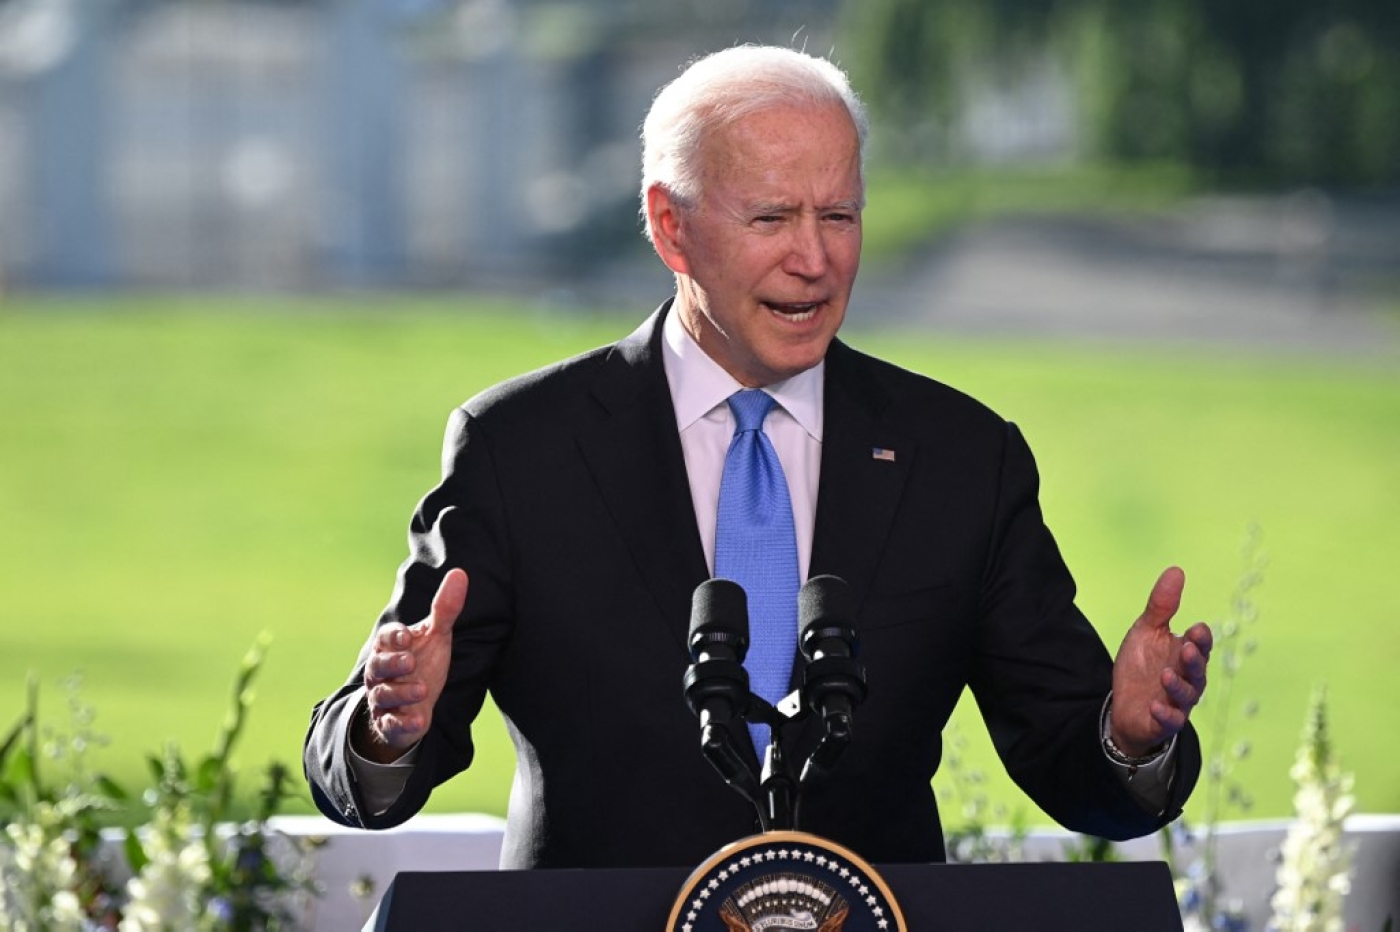 After Biden was elected into office, his administration highlighted that it would put human rights at the core of its foreign policy.